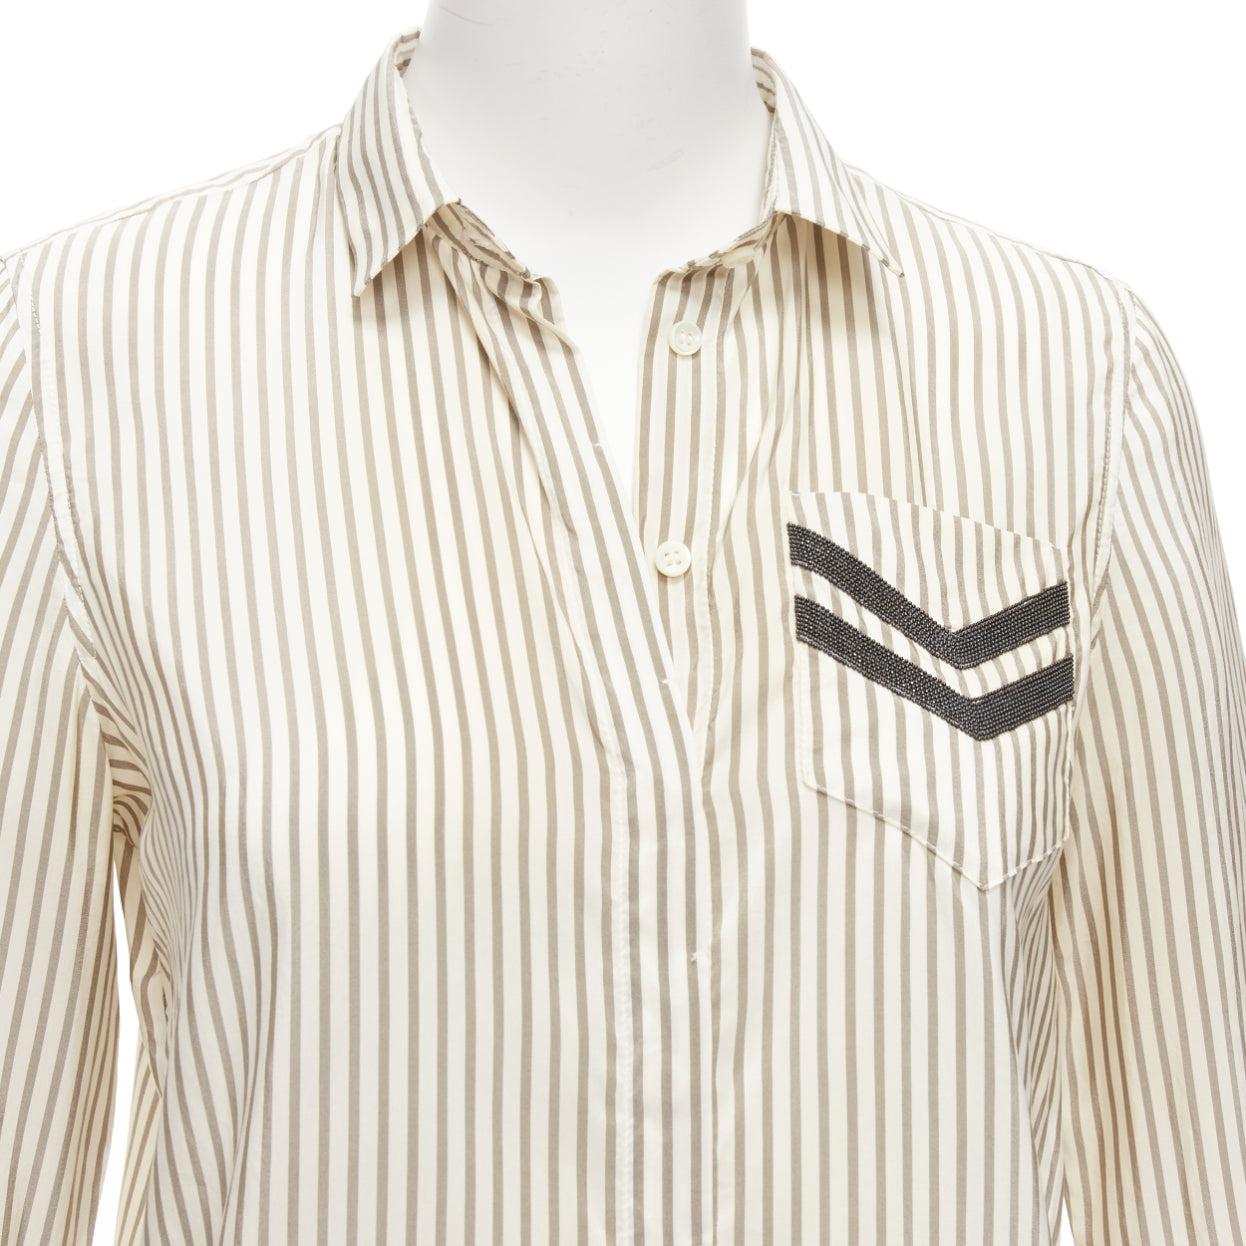 BRUNELLO CUCINELLI cream grey stripe black V beaded pocket dress shirt XS
Reference: EALU/A00007
Brand: Brunello Cucinelli
Material: Silk
Color: Grey, Cream
Pattern: Striped
Closure: Button
Made in: Italy

CONDITION:
Condition: Poor, this item was